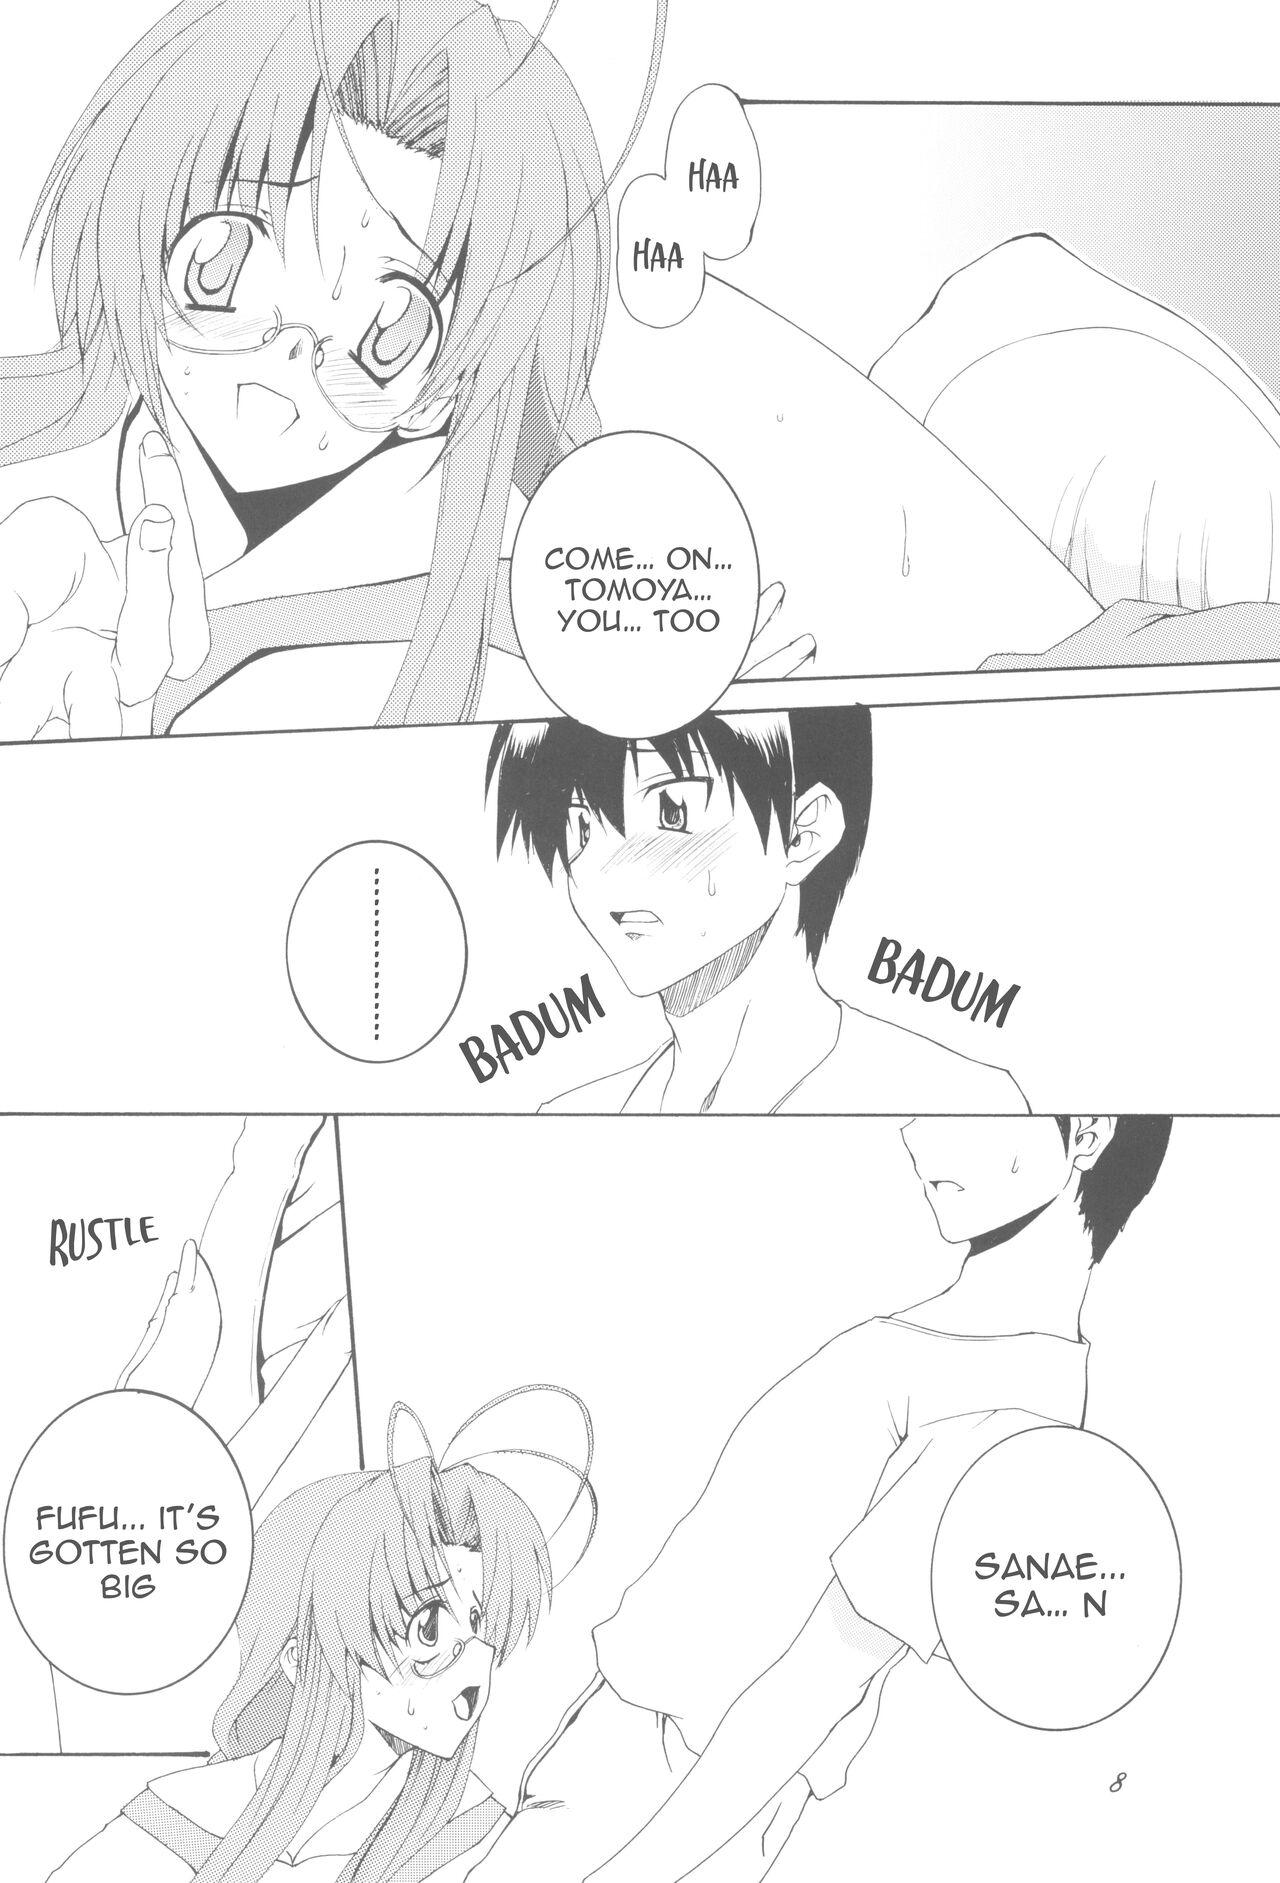 Scene Being Beauteous - Clannad Hot Wife - Page 7